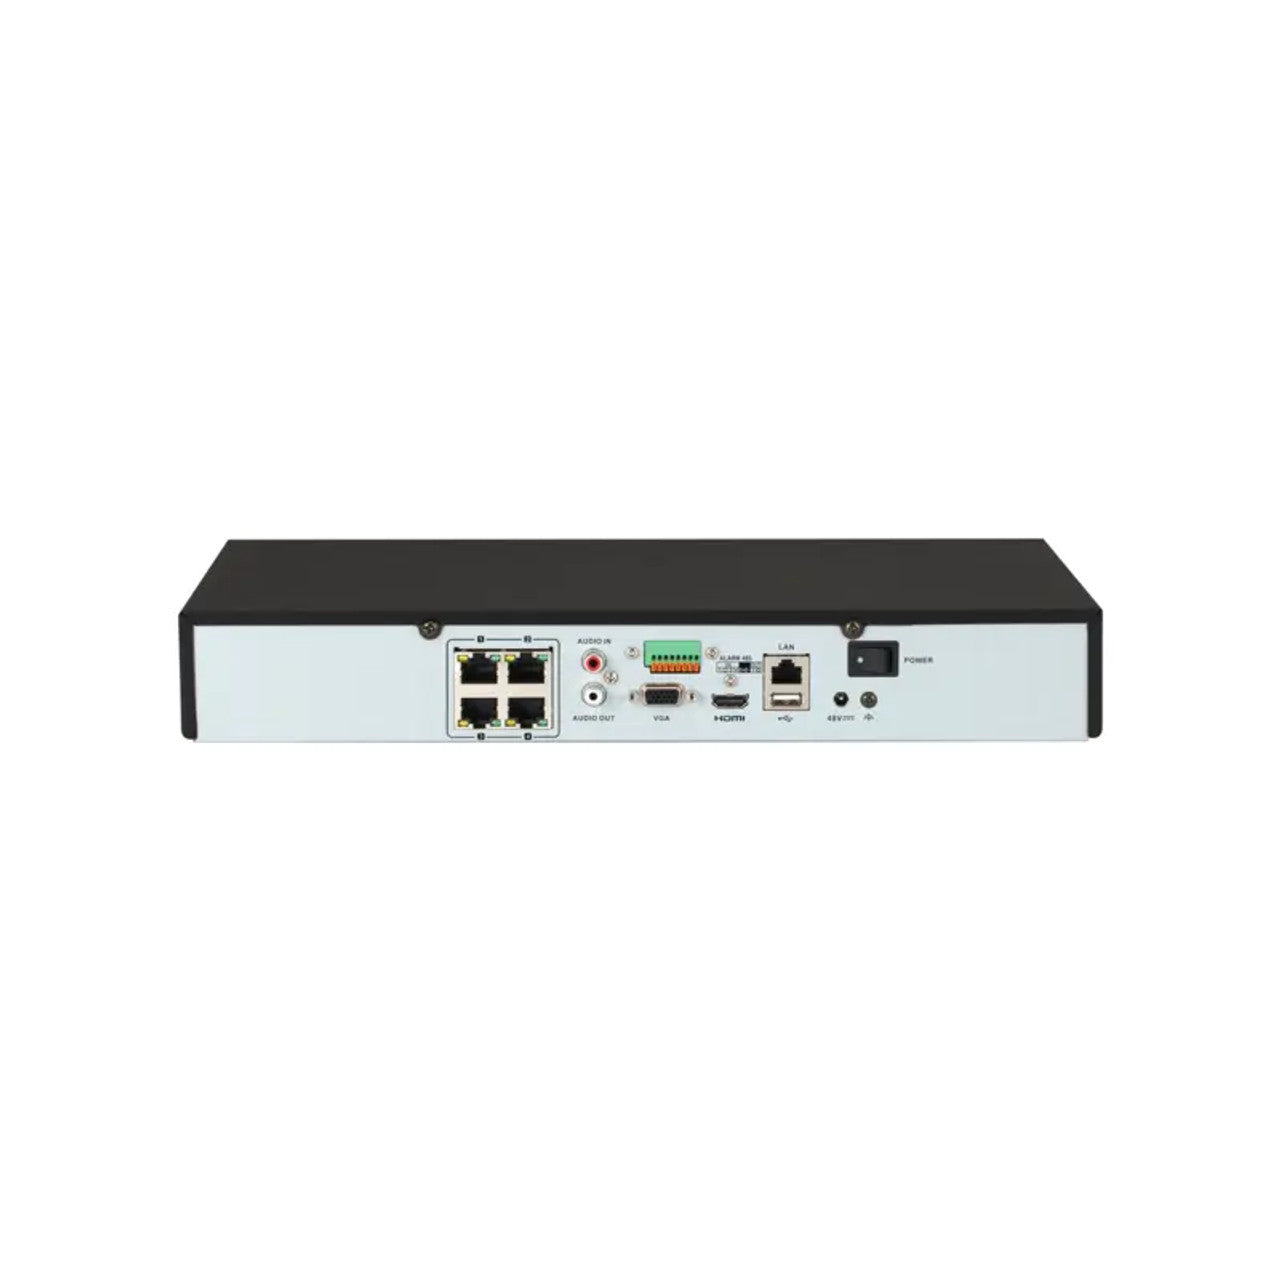 Digital Watchdog DW-VP932T4P 4-channel VMAX IP Plus PoE NVR with 5 virtual channels, 32TB HDD